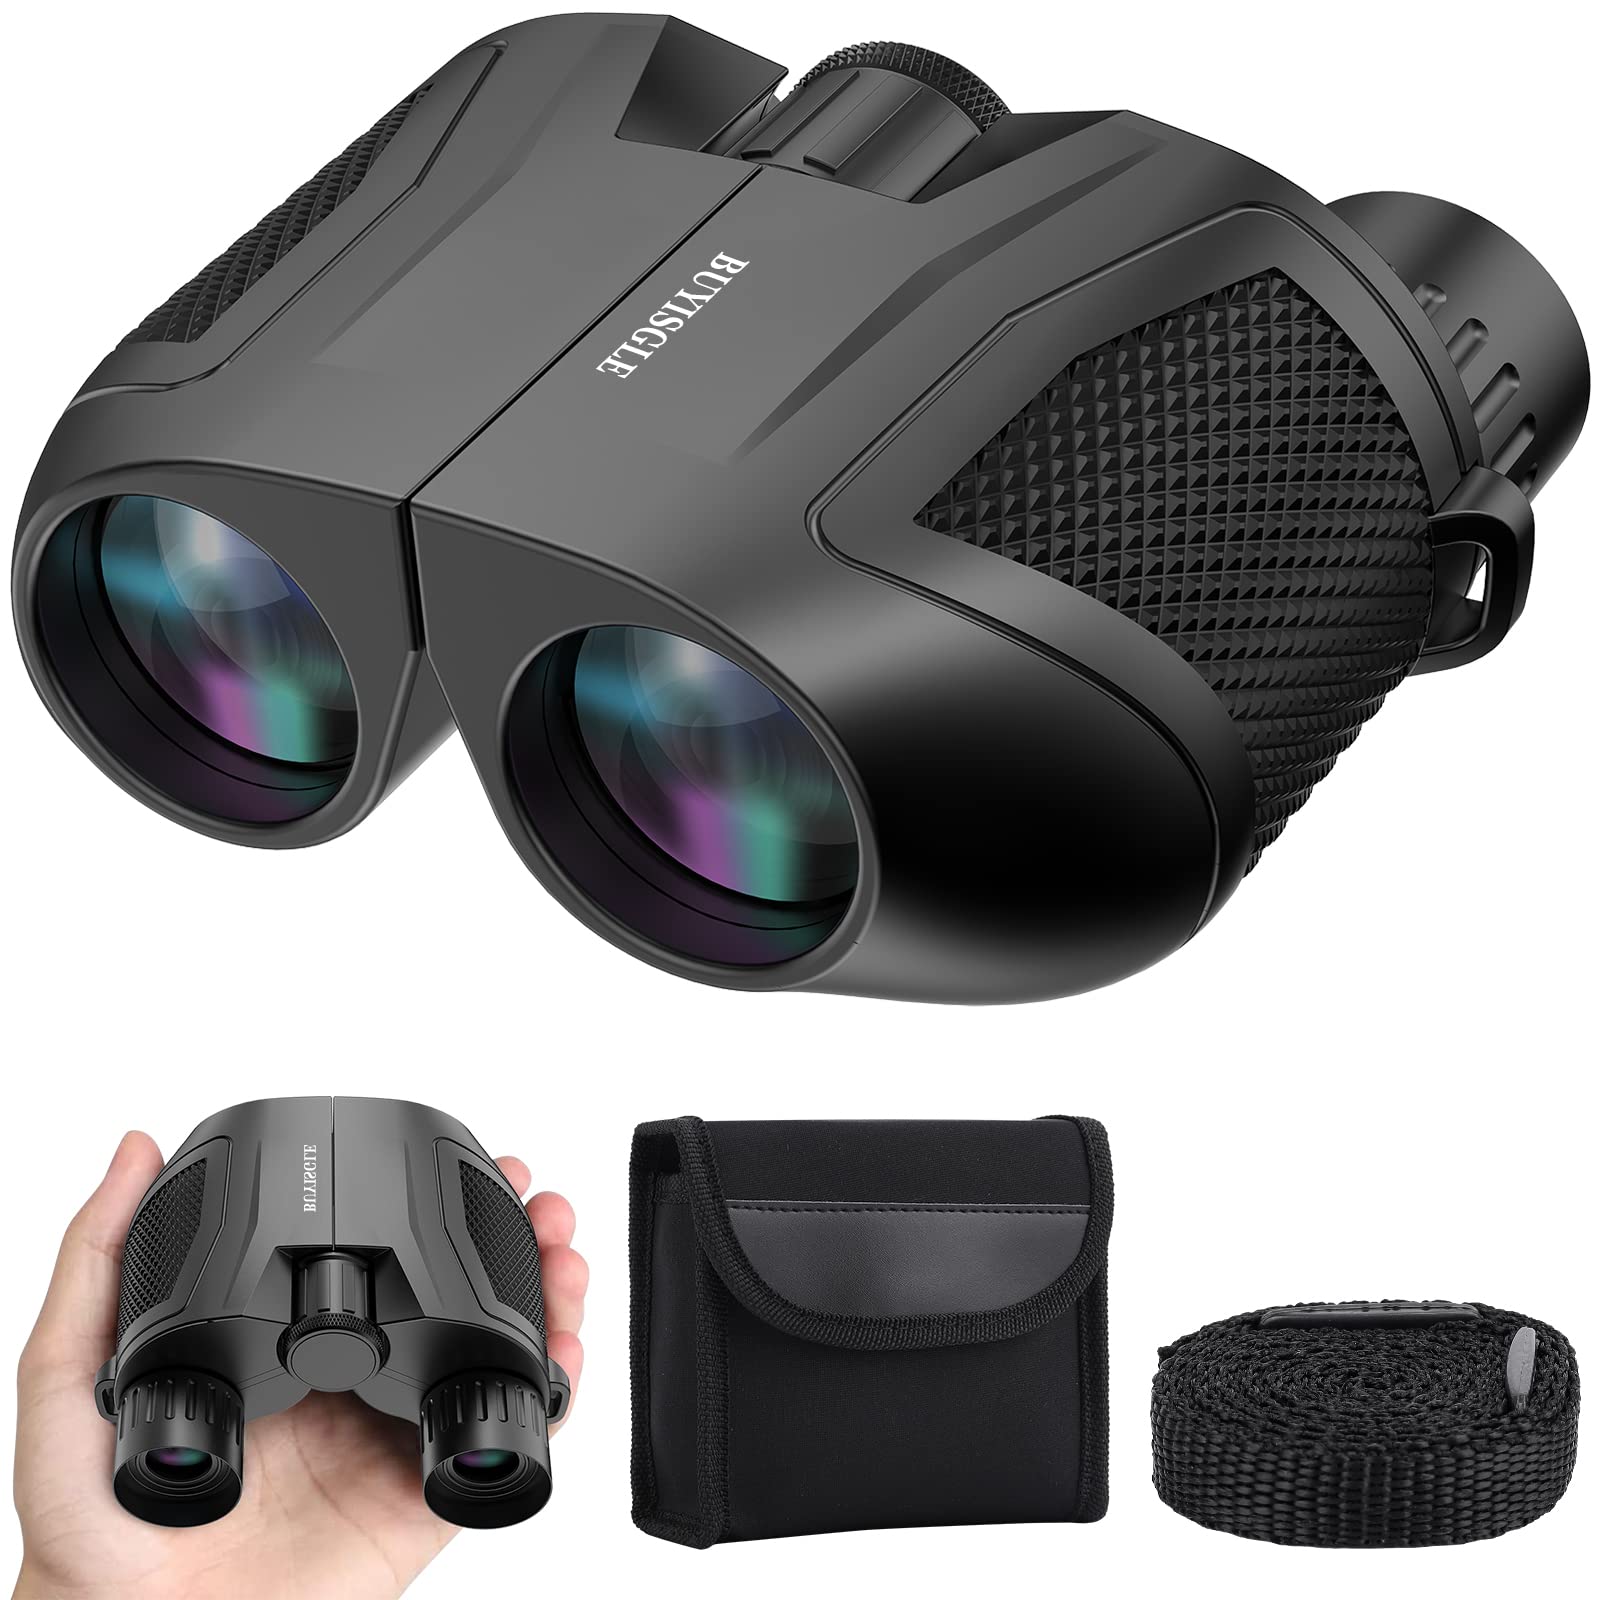 Buyisgle Compact Binoculars for Adults and Kids,15×25 High Power Binoculars for Bird Watching,Easy Focus Large Eyepiece Small Binoculars for Outdoor Hunting,Travel,Sightseeing and Concerts